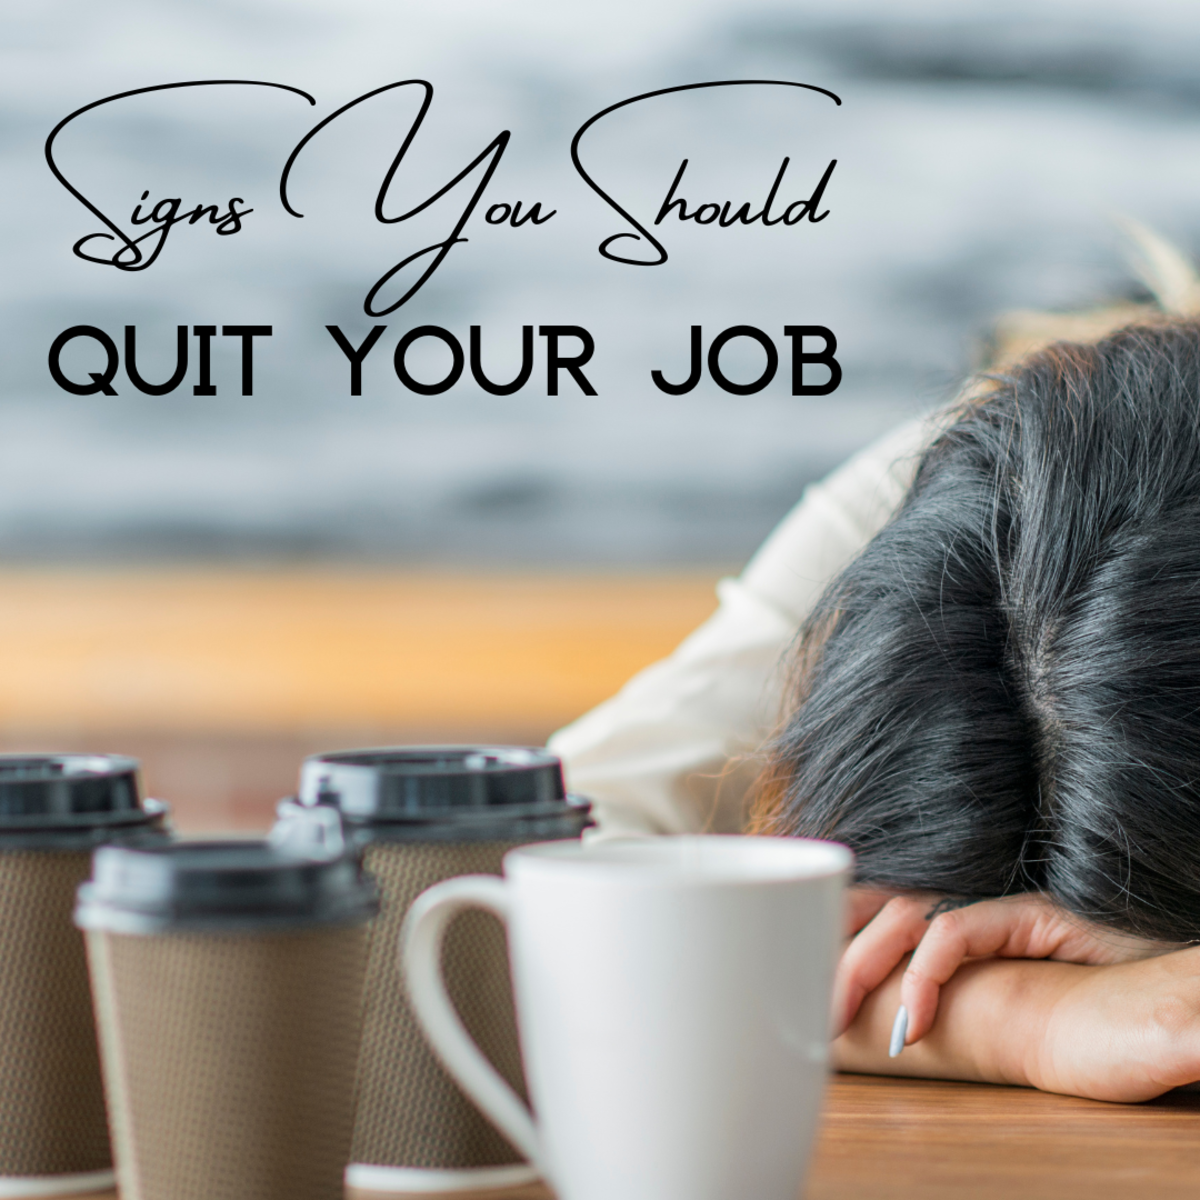 Are you an exhausted, emotional wreck at work? It might be time to consider quitting. 